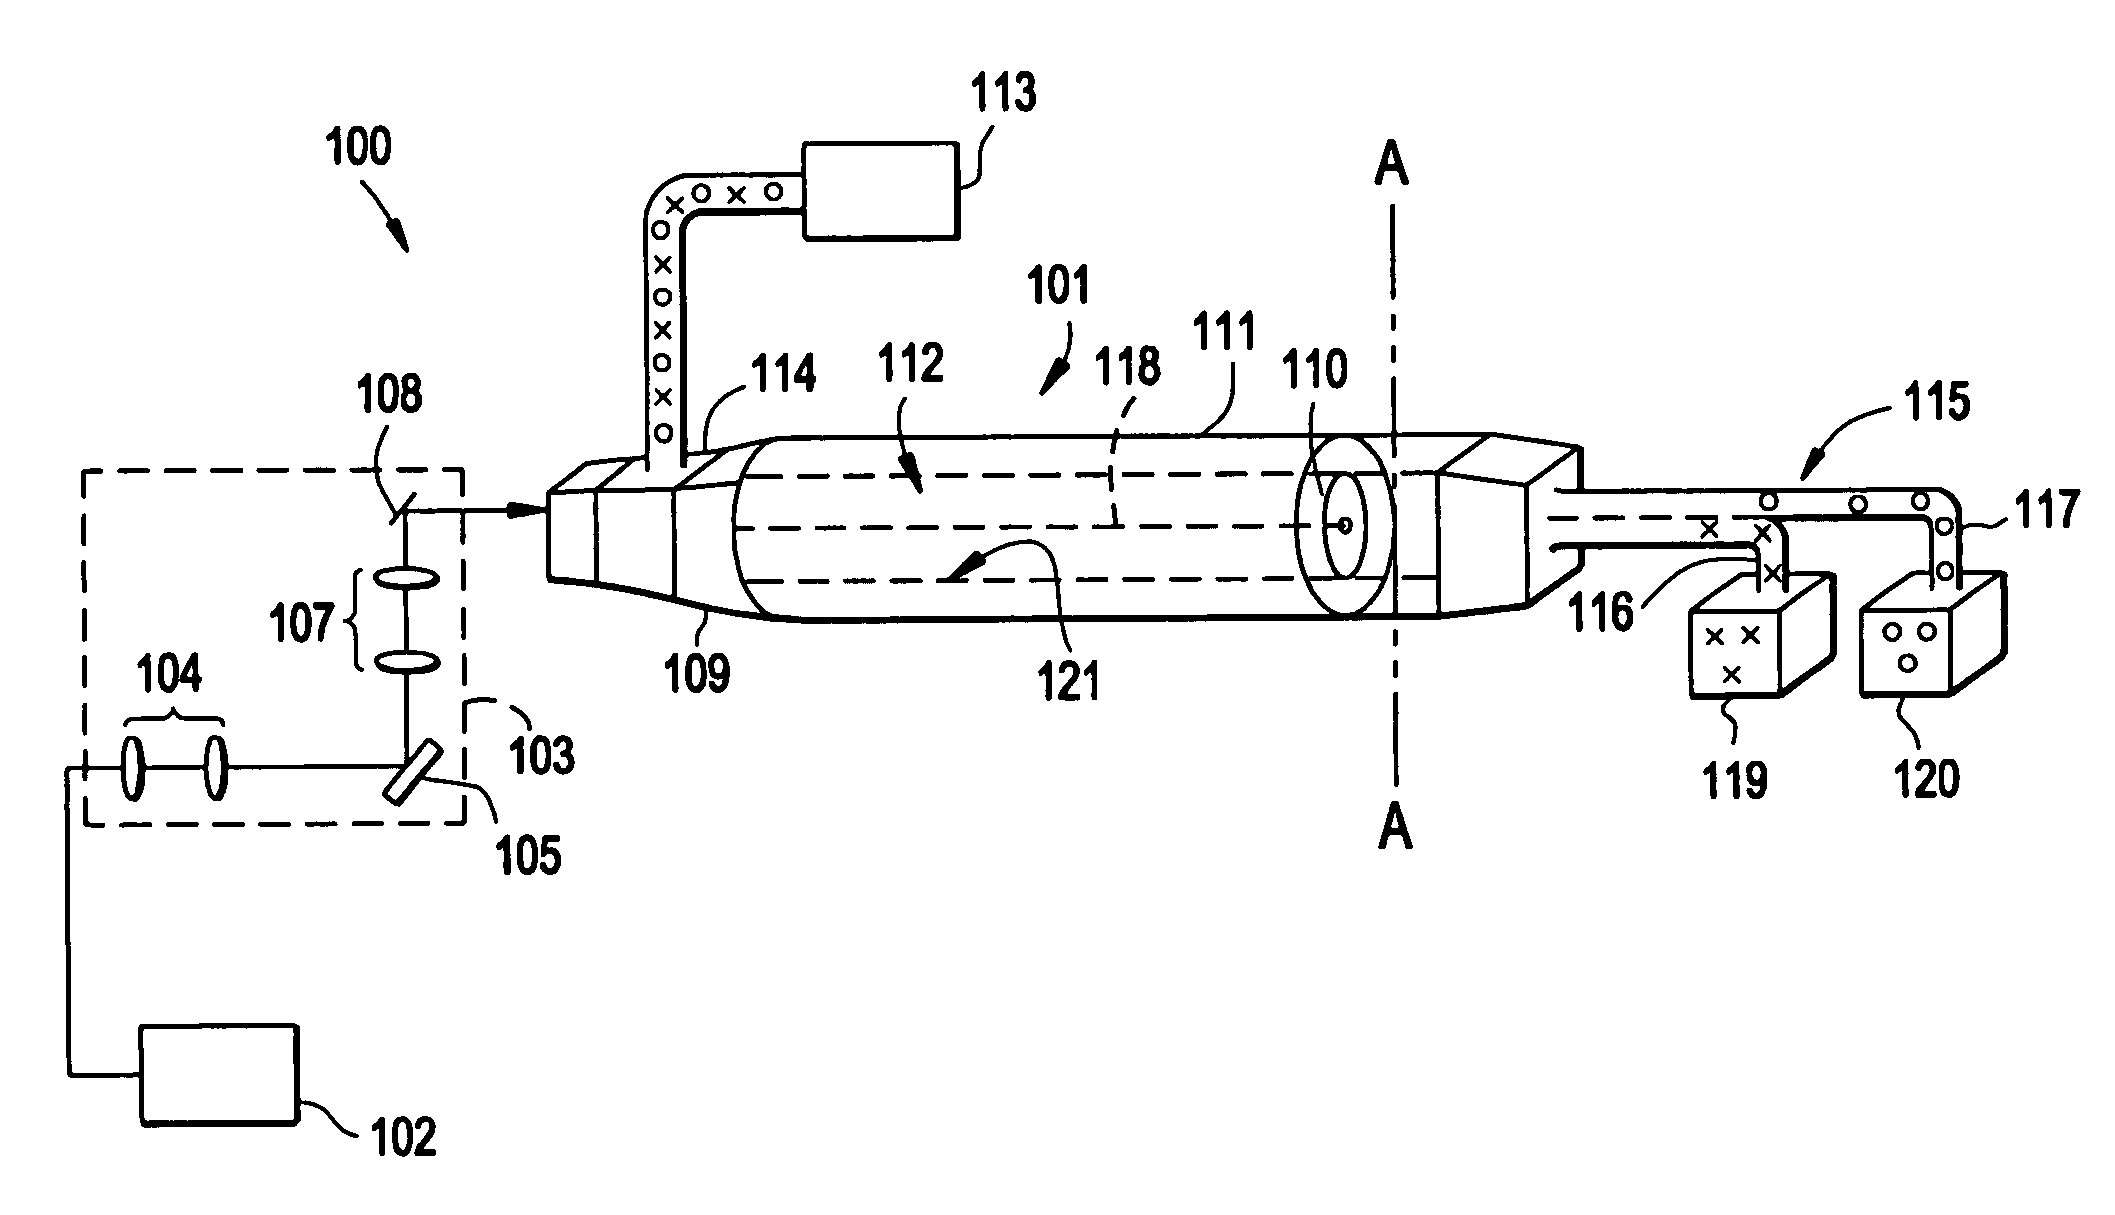 Apparatus for optically-based sorting within liquid core waveguides